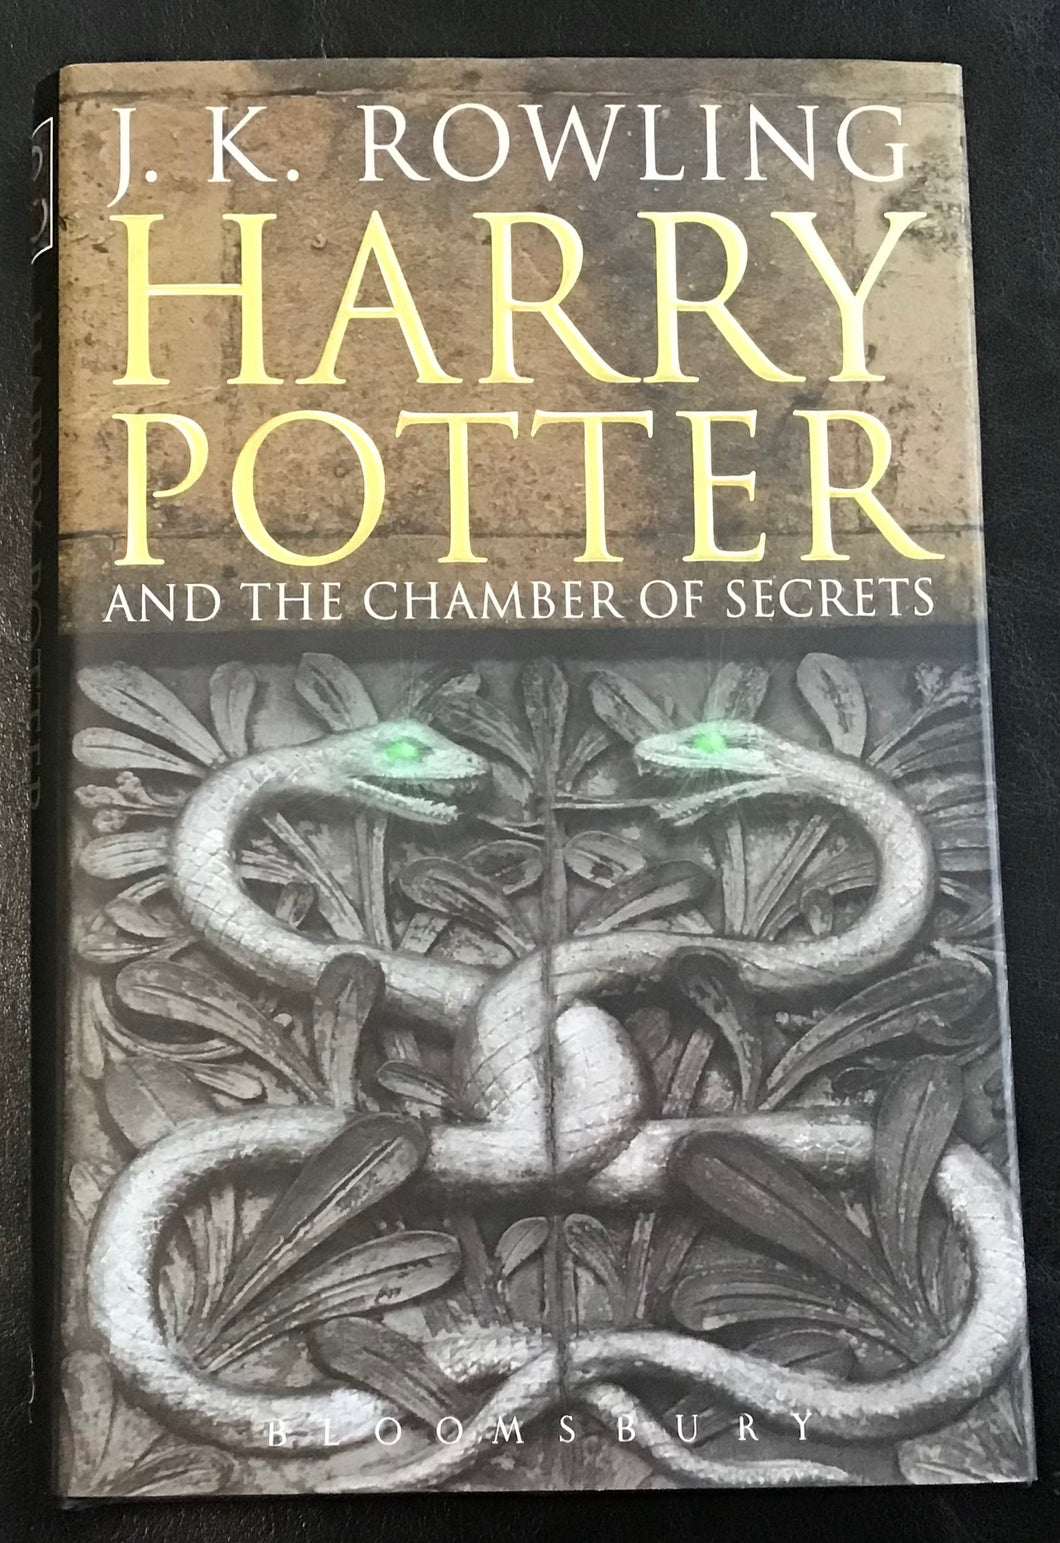 Harry Potter And The Chamber Of Secrets, J.K Rowling